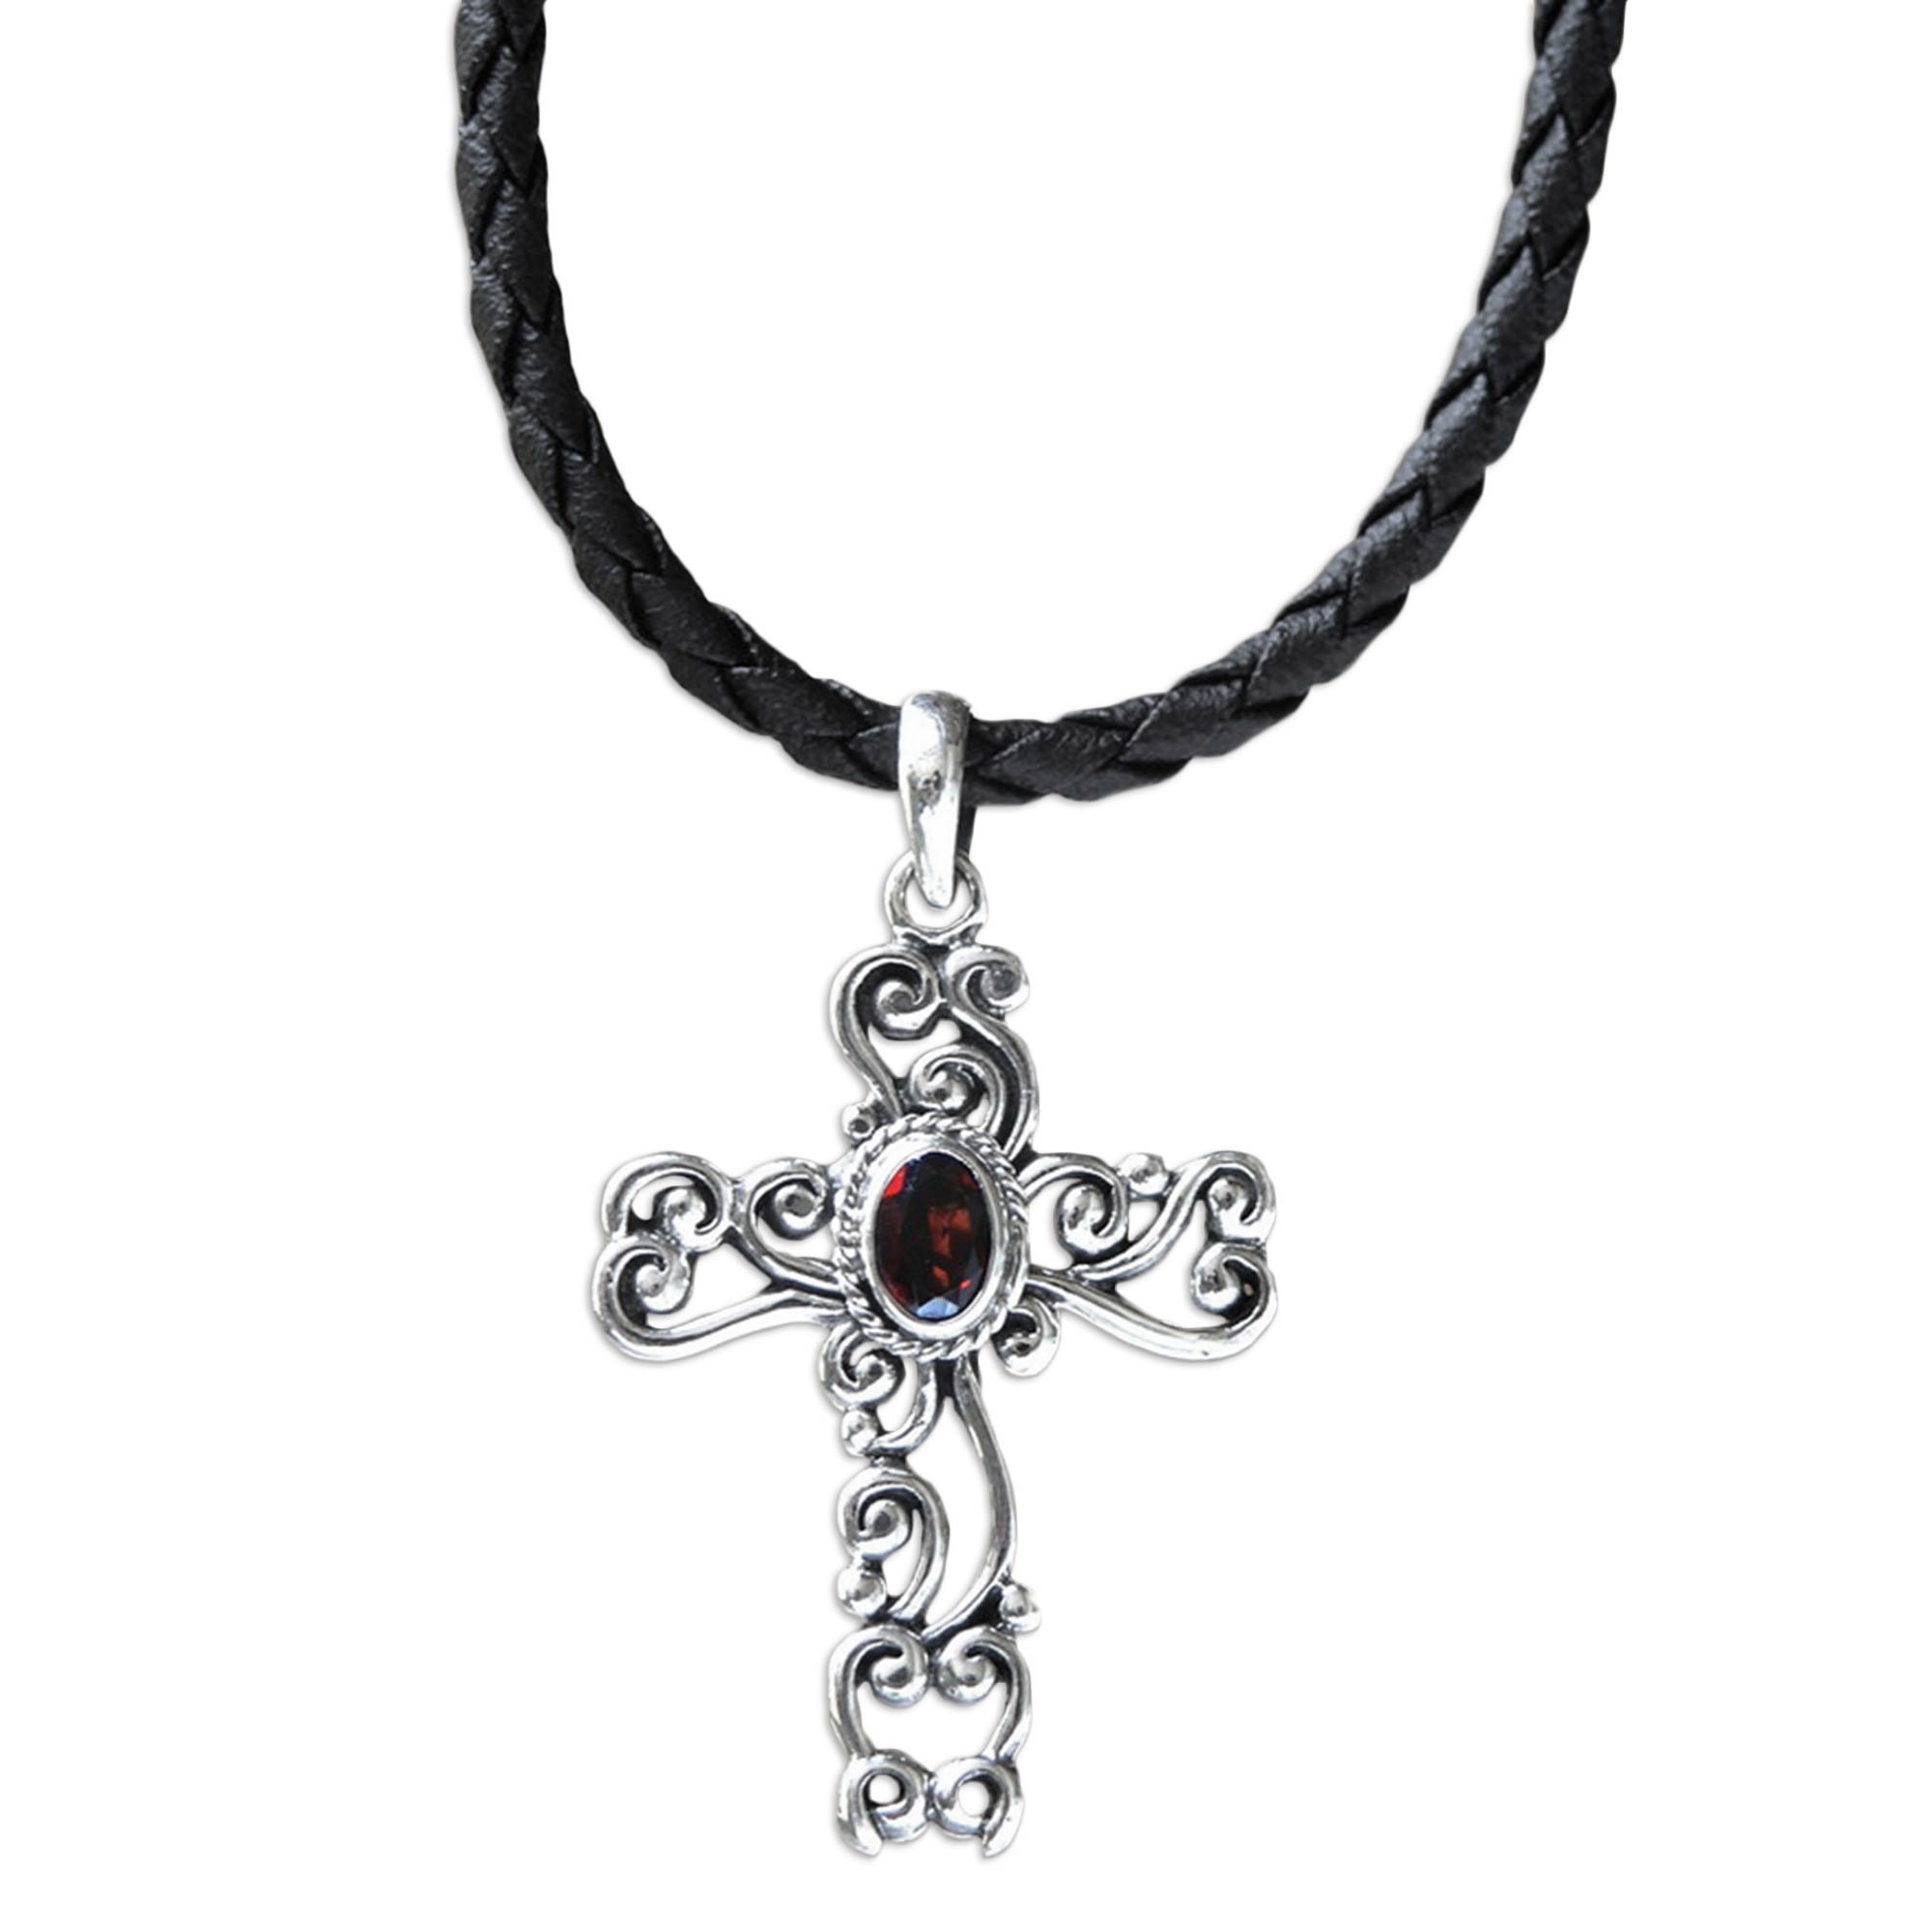 Sterling Silver and Garnet Religious Necklace - Balinese Cross | NOVICA